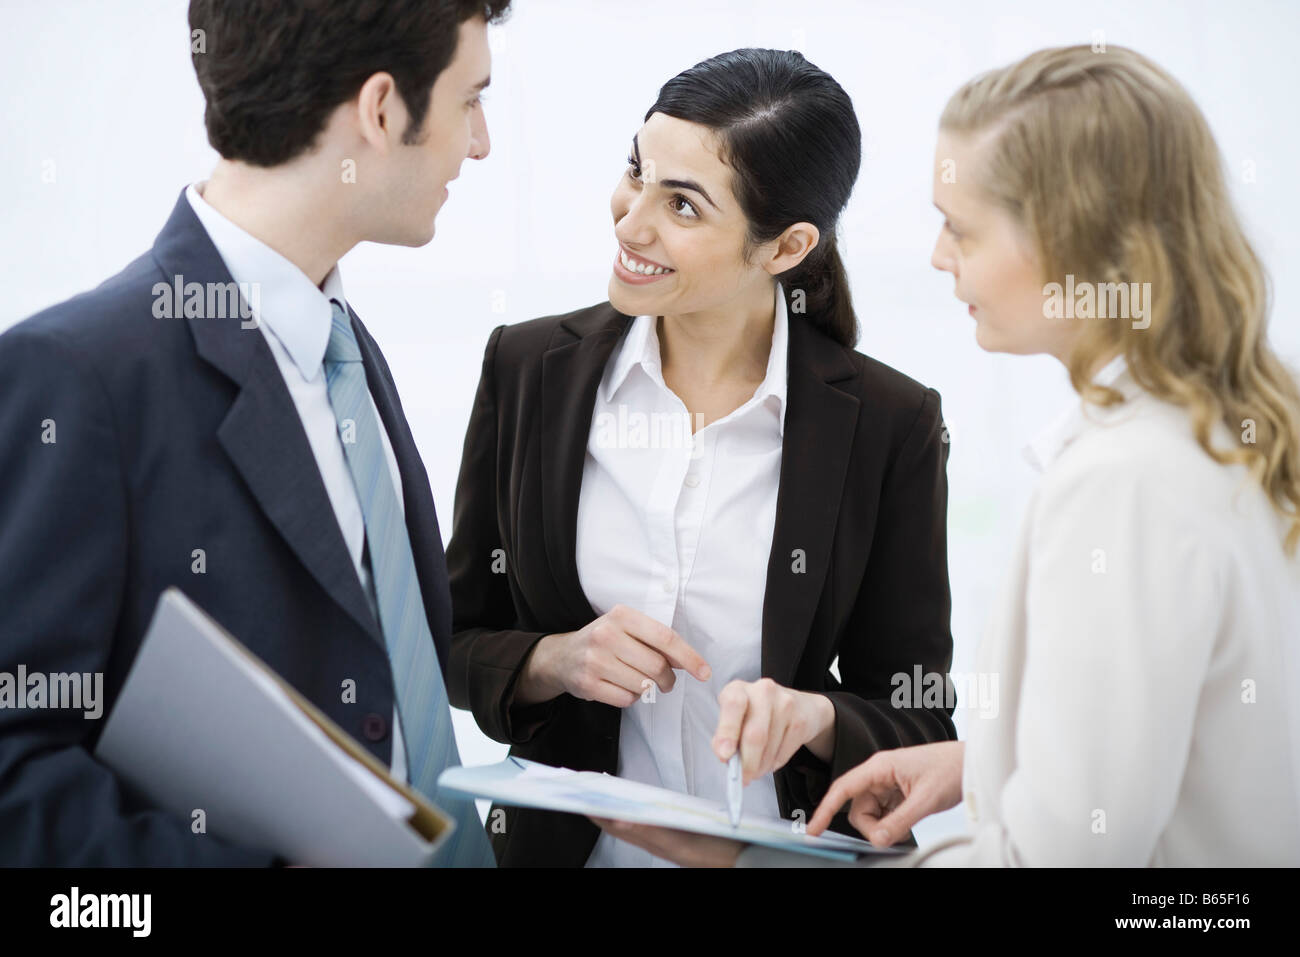 Business associates looking at document together Stock Photo